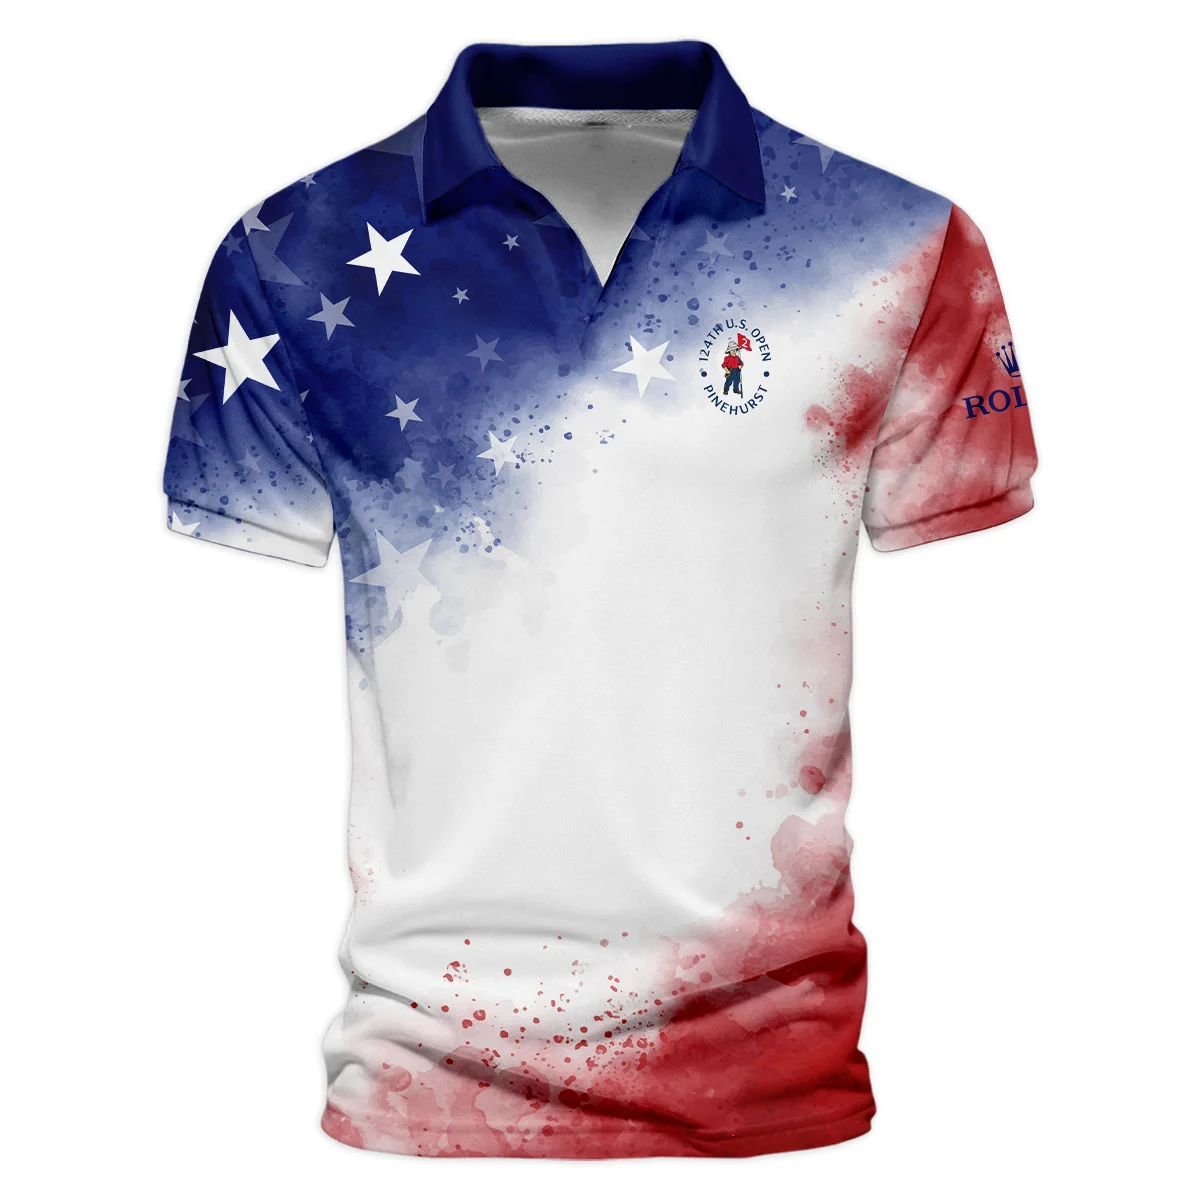 124th U.S. Open Pinehurst Rolex Blue Red Watercolor Star White Backgound Vneck Polo Shirt Style Classic Polo Shirt For Men